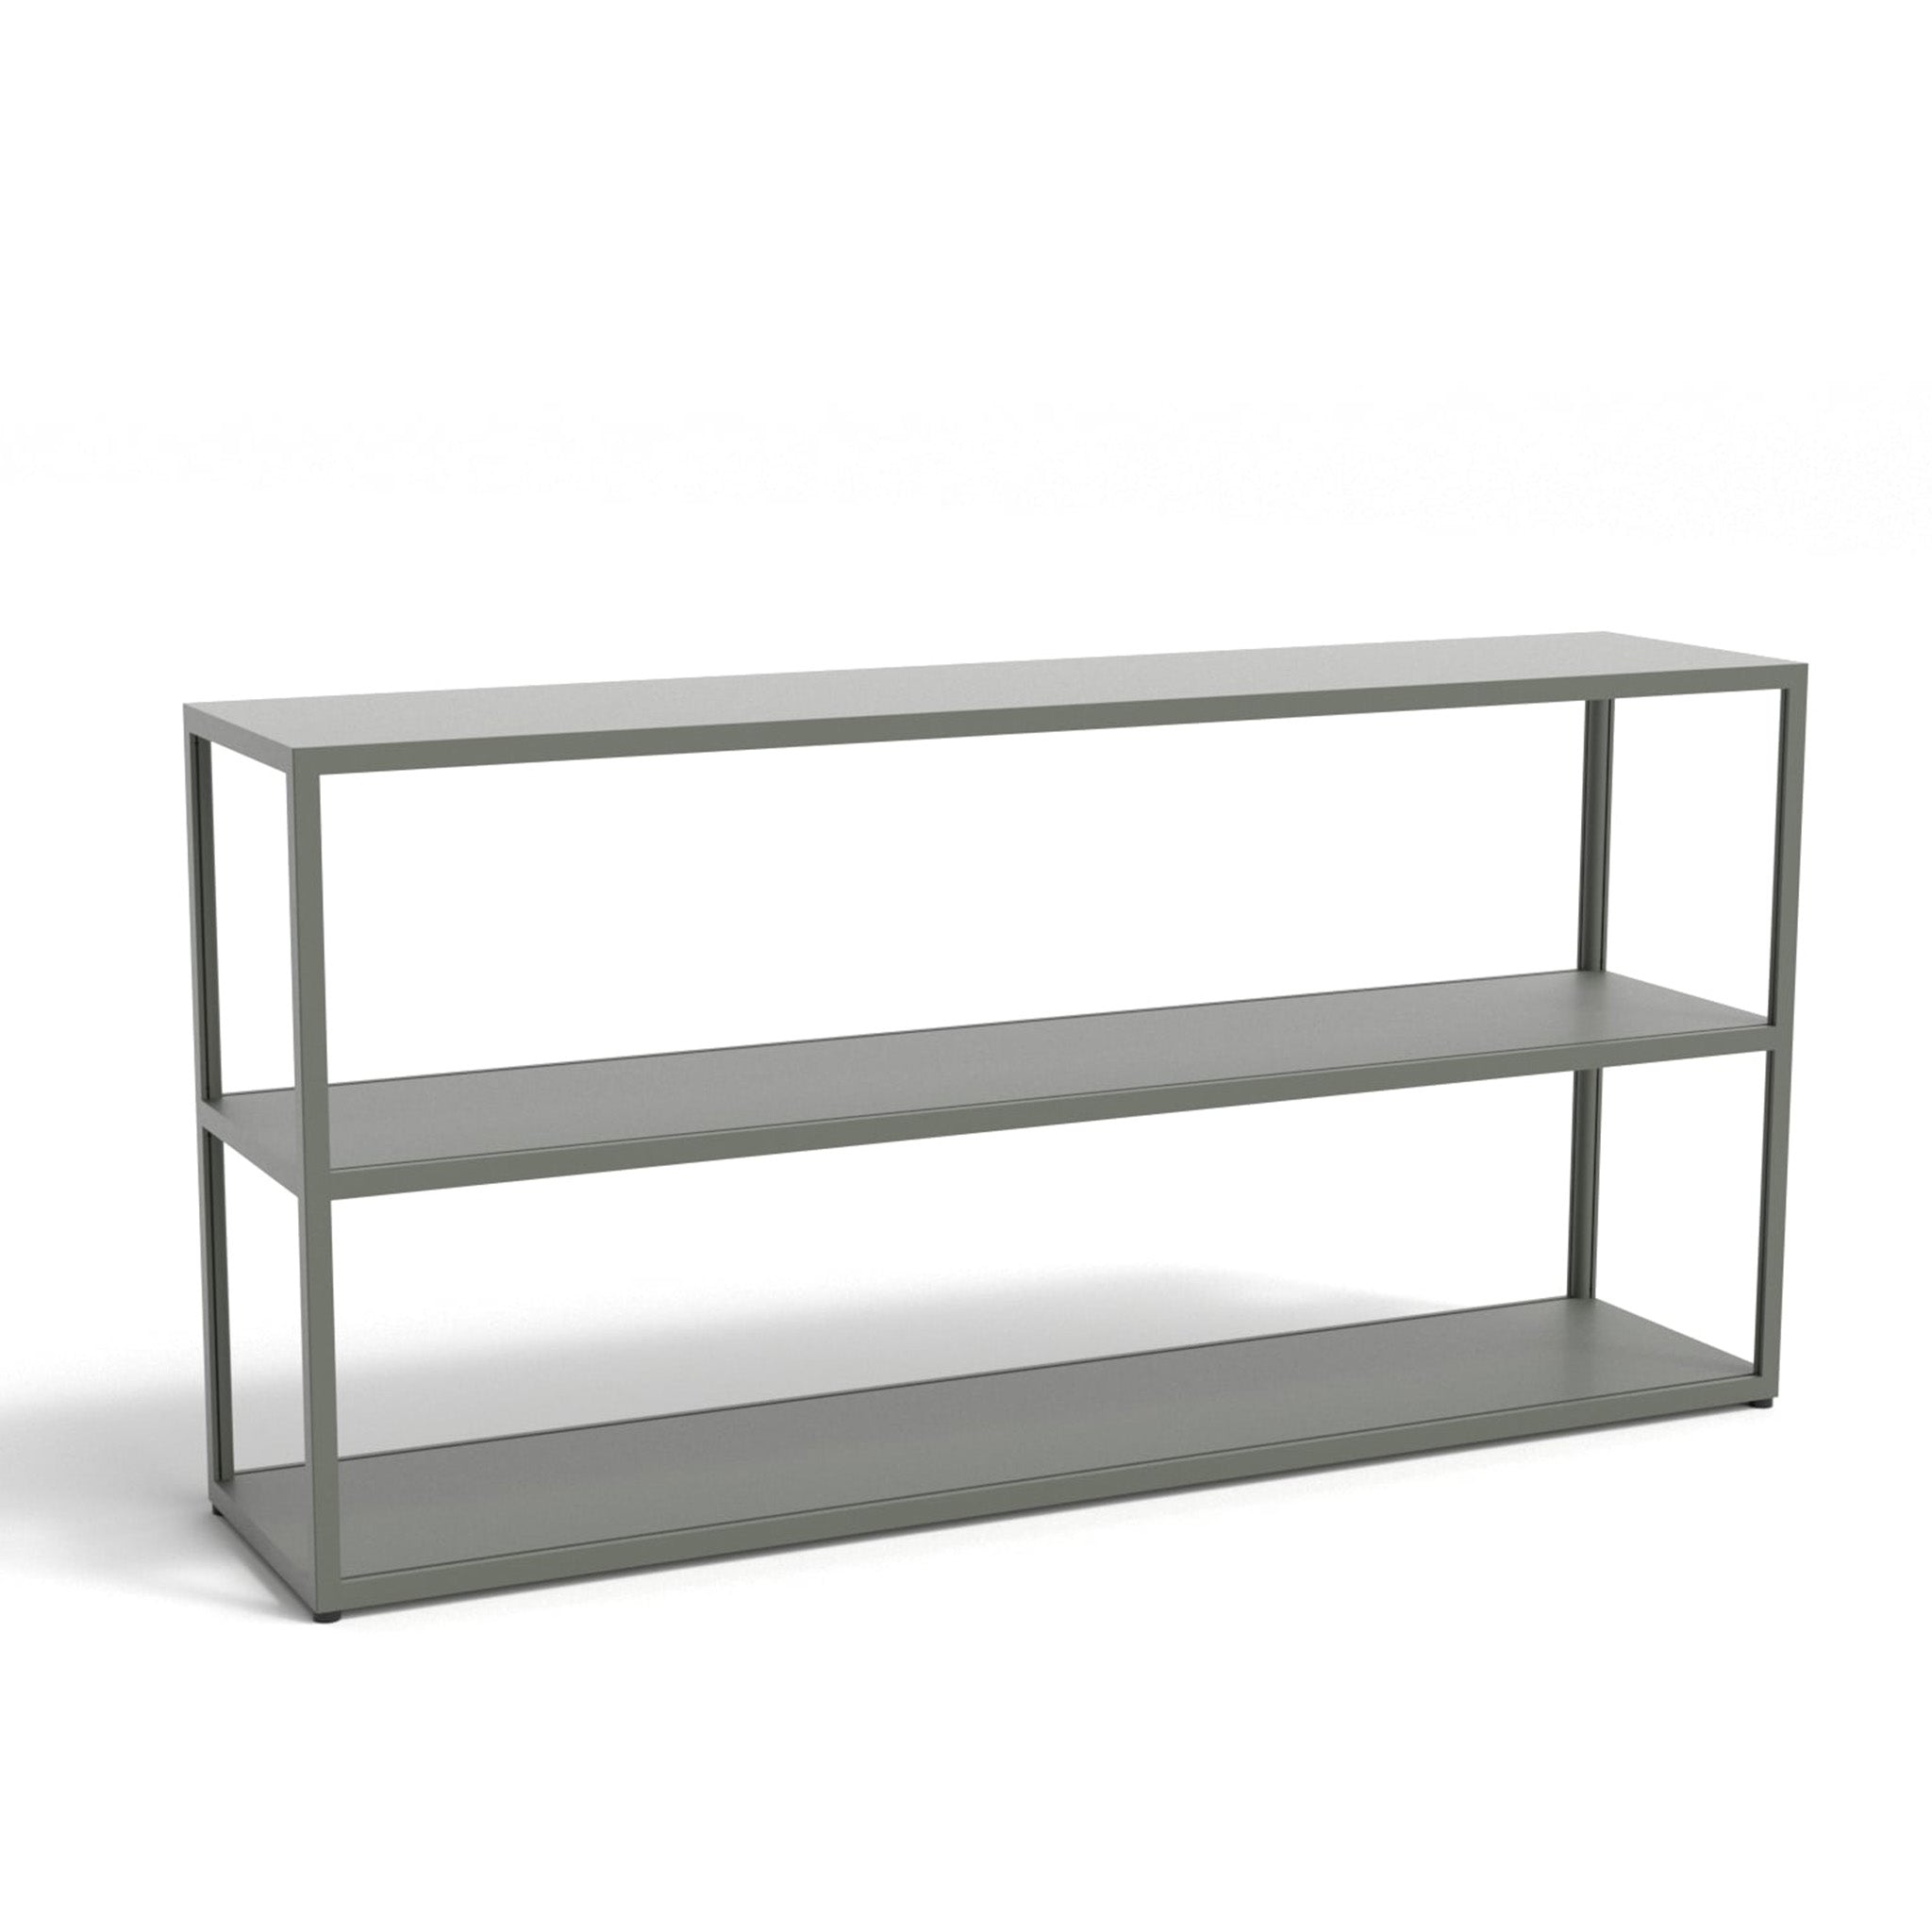 Clearance New Order Shelving Combination 202 / W150cm / Army by HAY